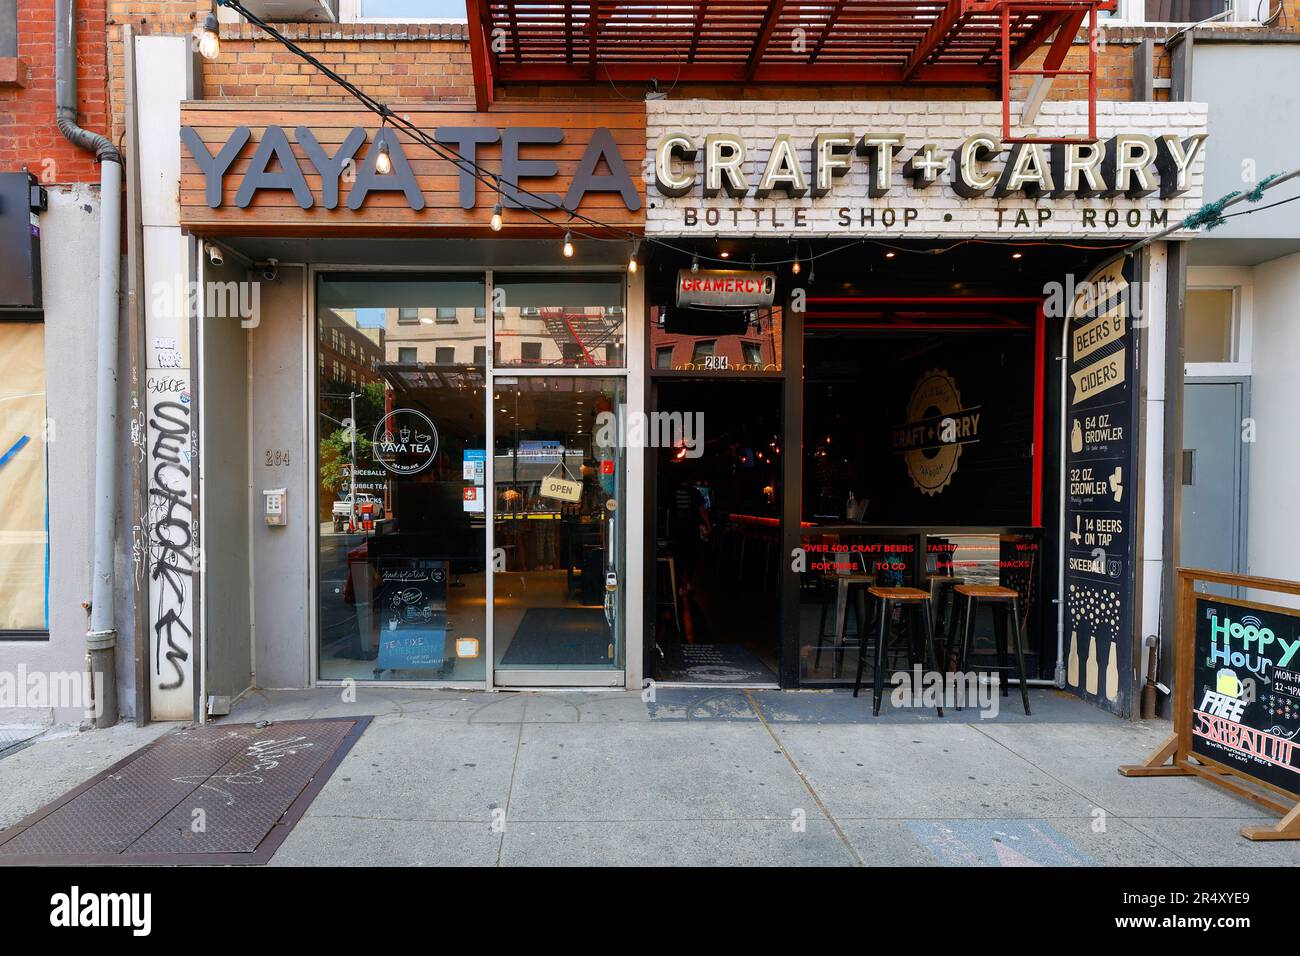 Yaya Tea, Craft + Carry, 284 2nd Ave, New York, NYC storefront photo of a tea cafe and a beer tap room in Manhattan's Gramercy neighborhood. Stock Photo